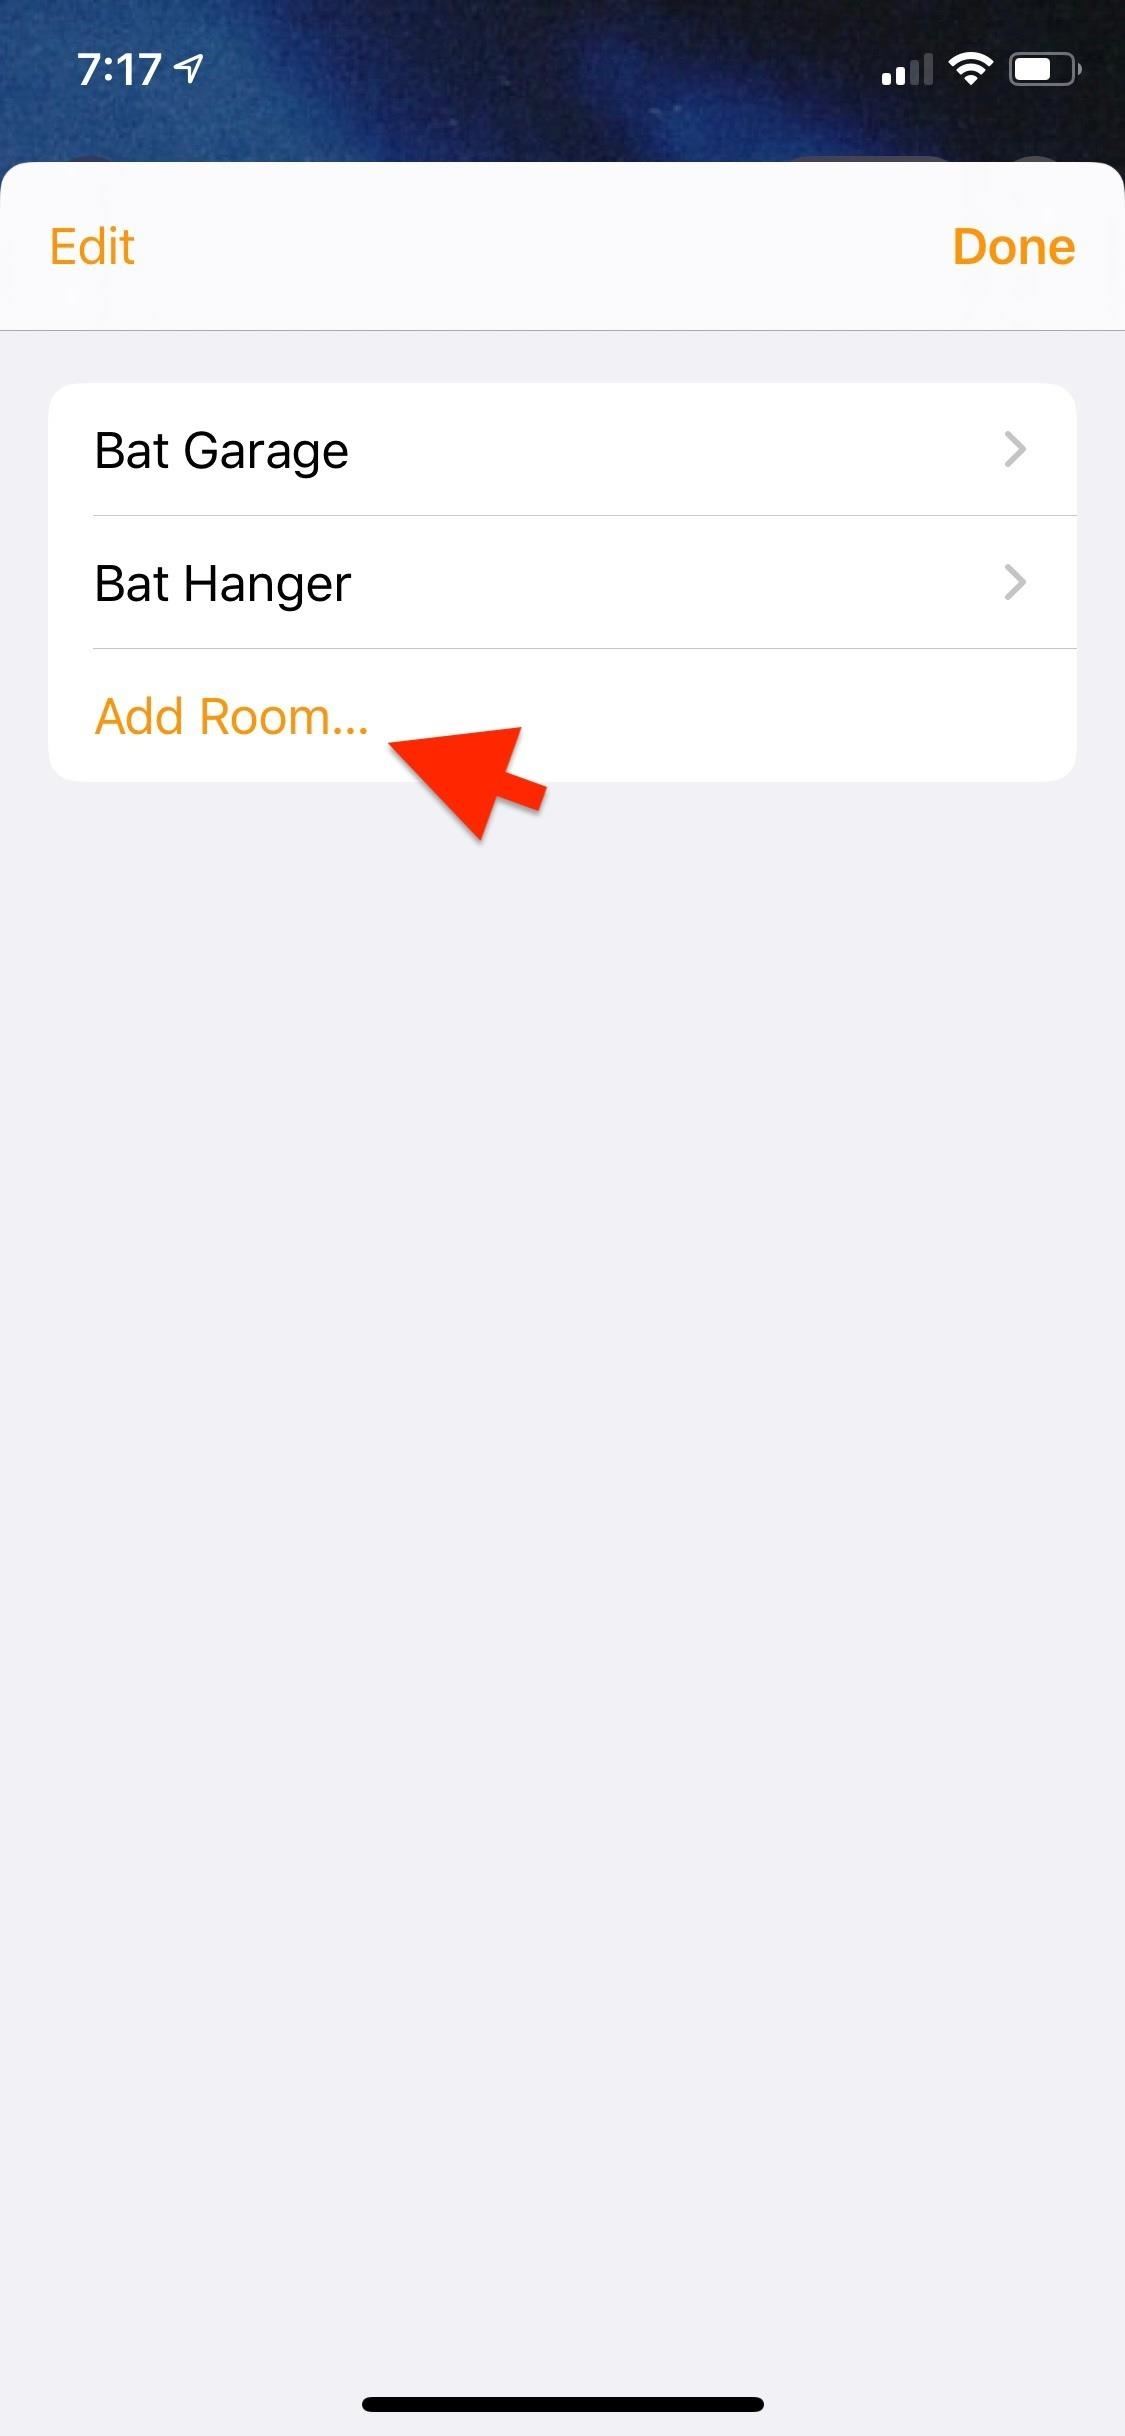 Organize Your Smart Home, Rooms & Zones in Apple's Home App to Streamline Siri Commands